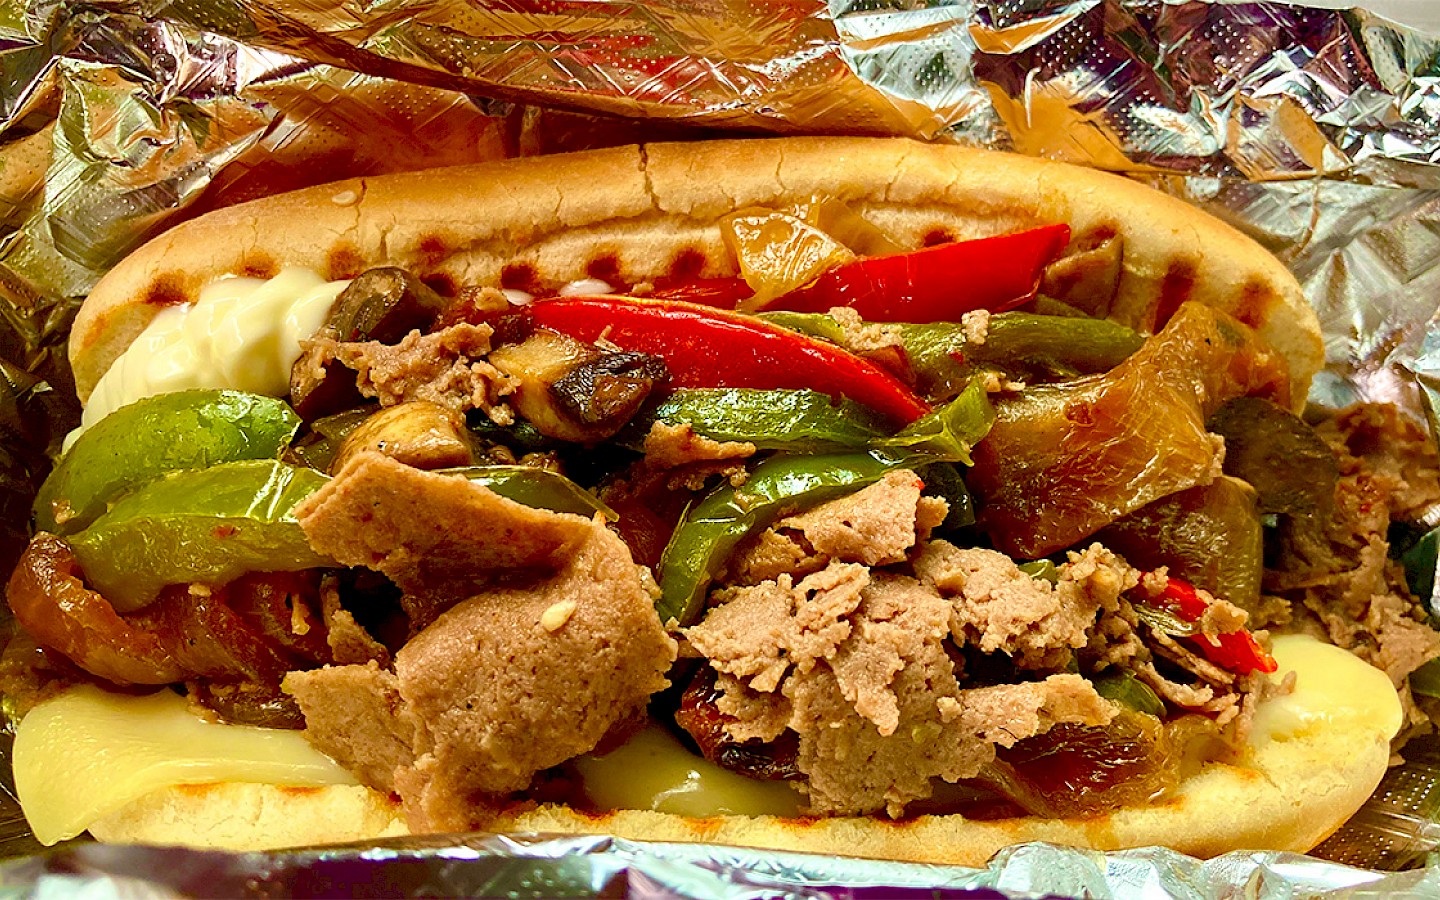 a phily cheesesteak sandwich, with beef, onions, bell peppers